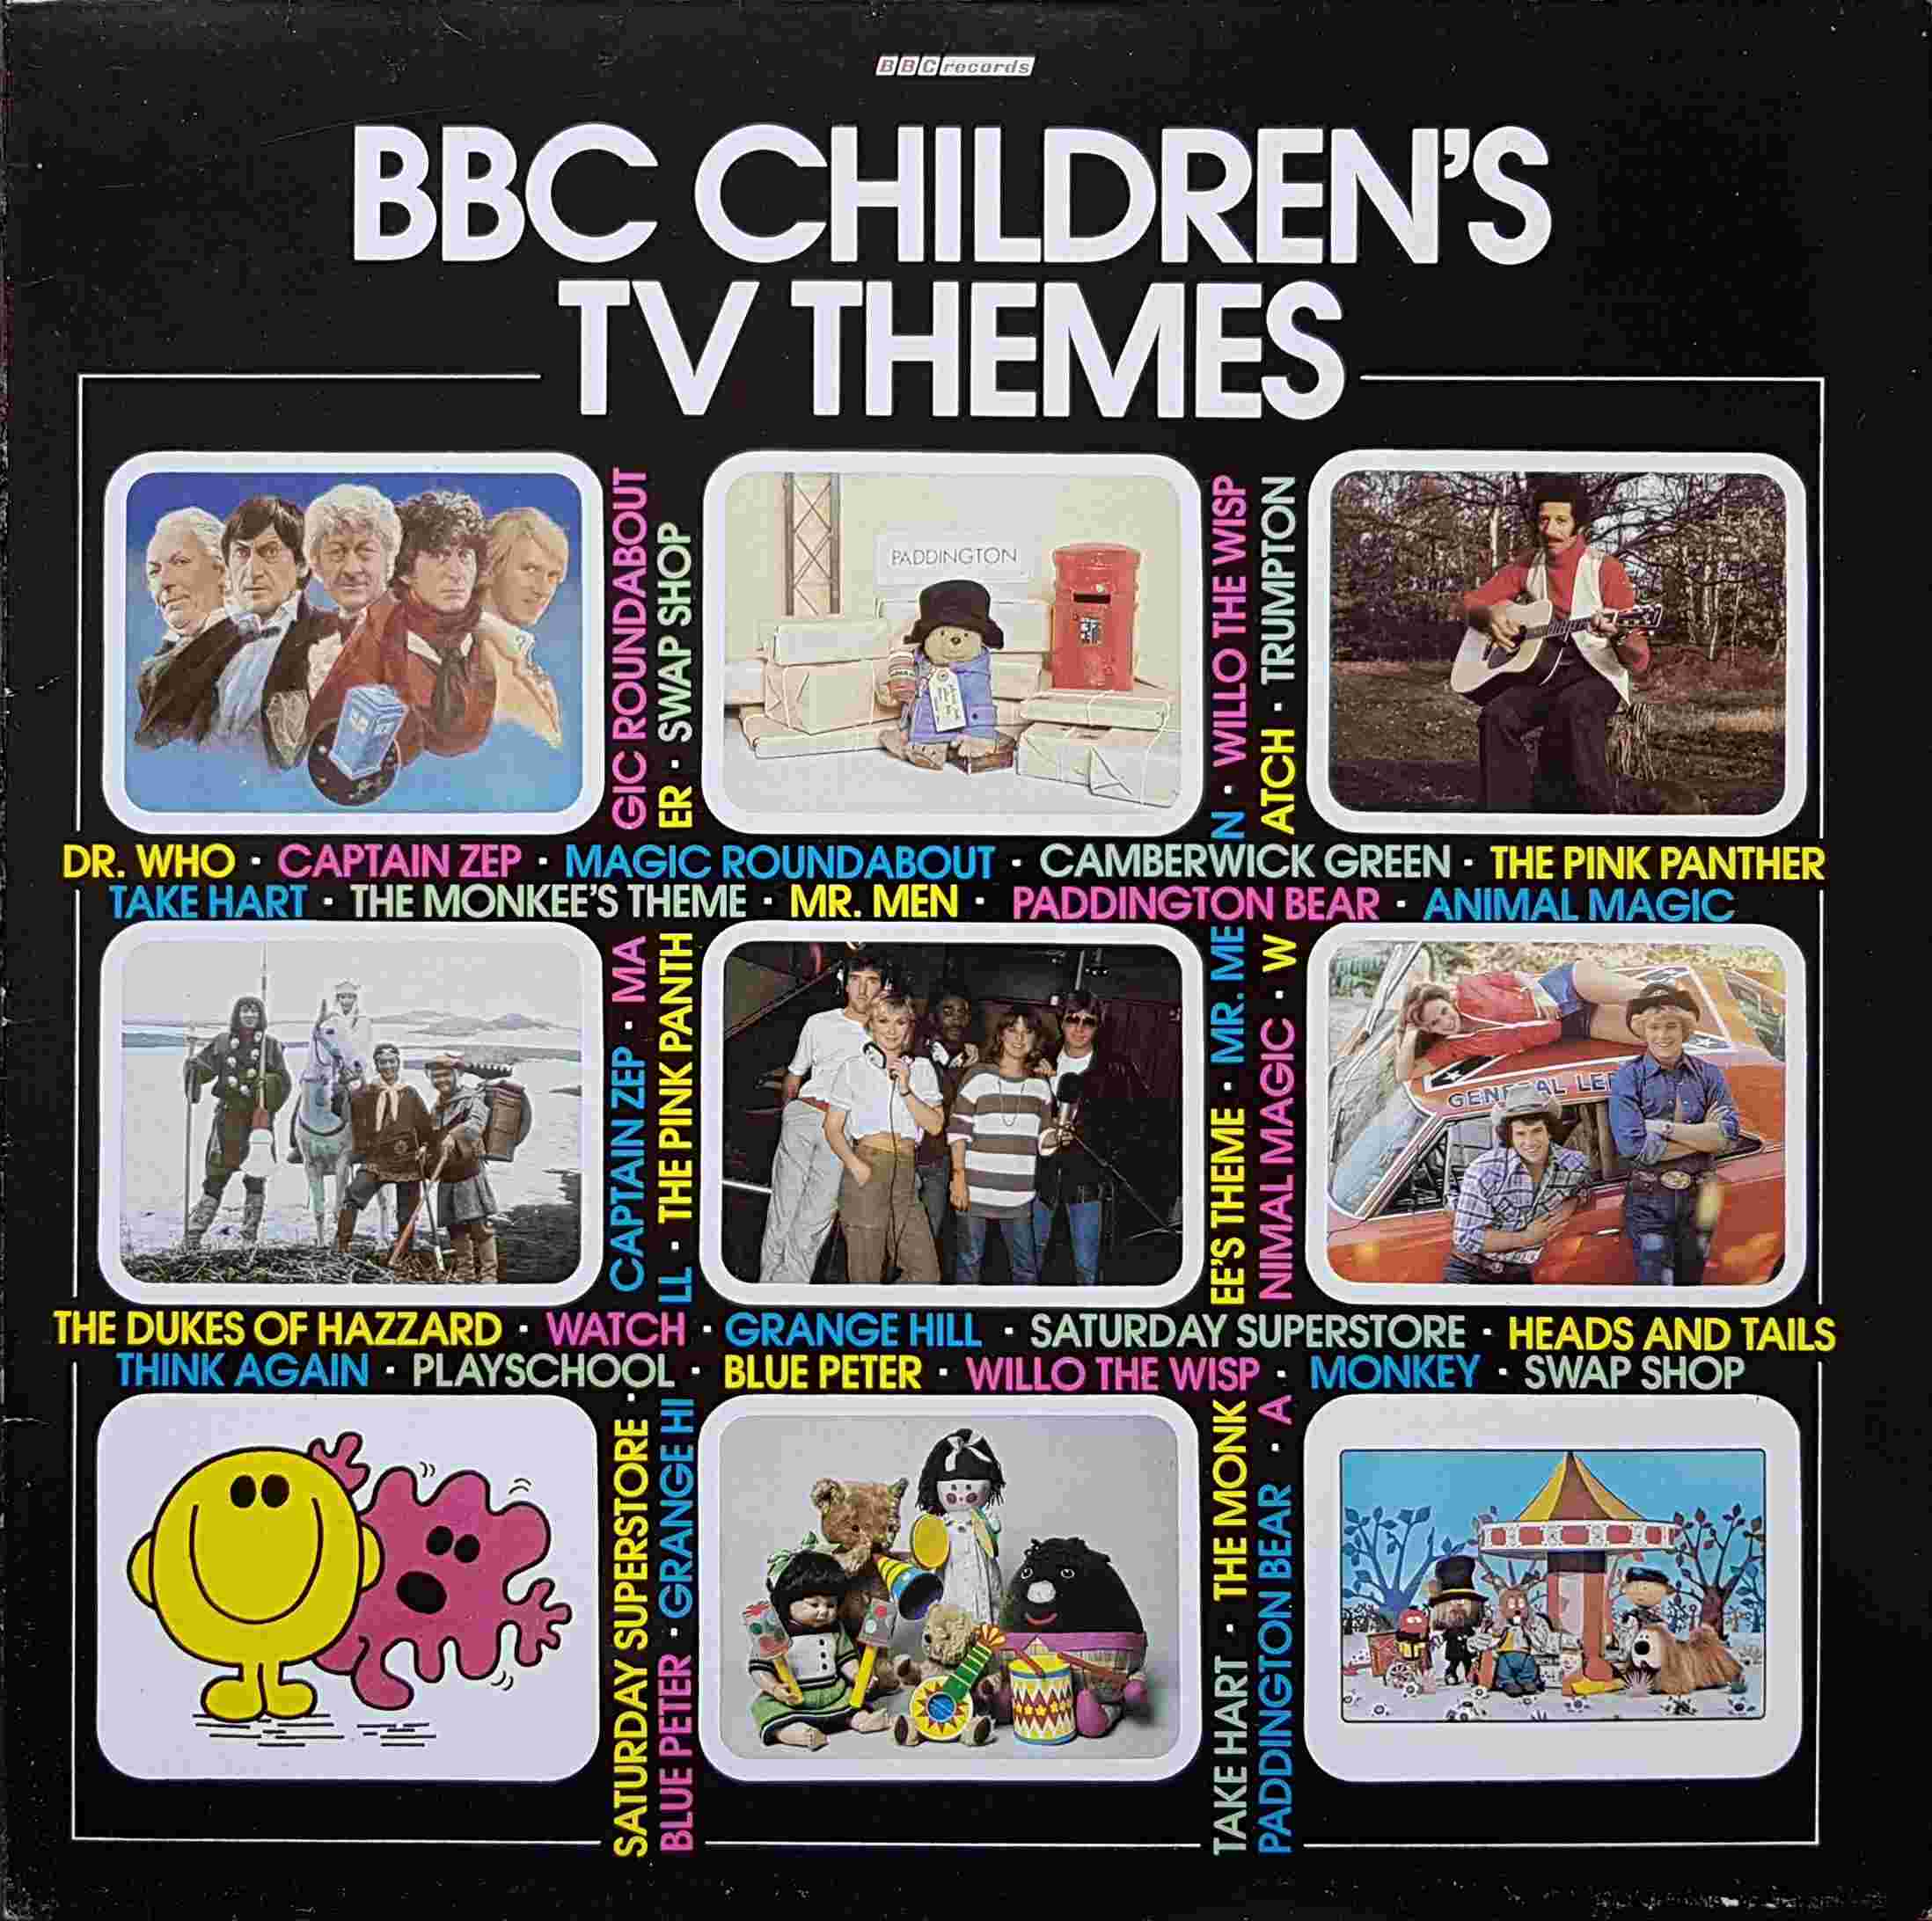 Picture of REH 486 BBC children's TV themes by artist Various from the BBC albums - Records and Tapes library